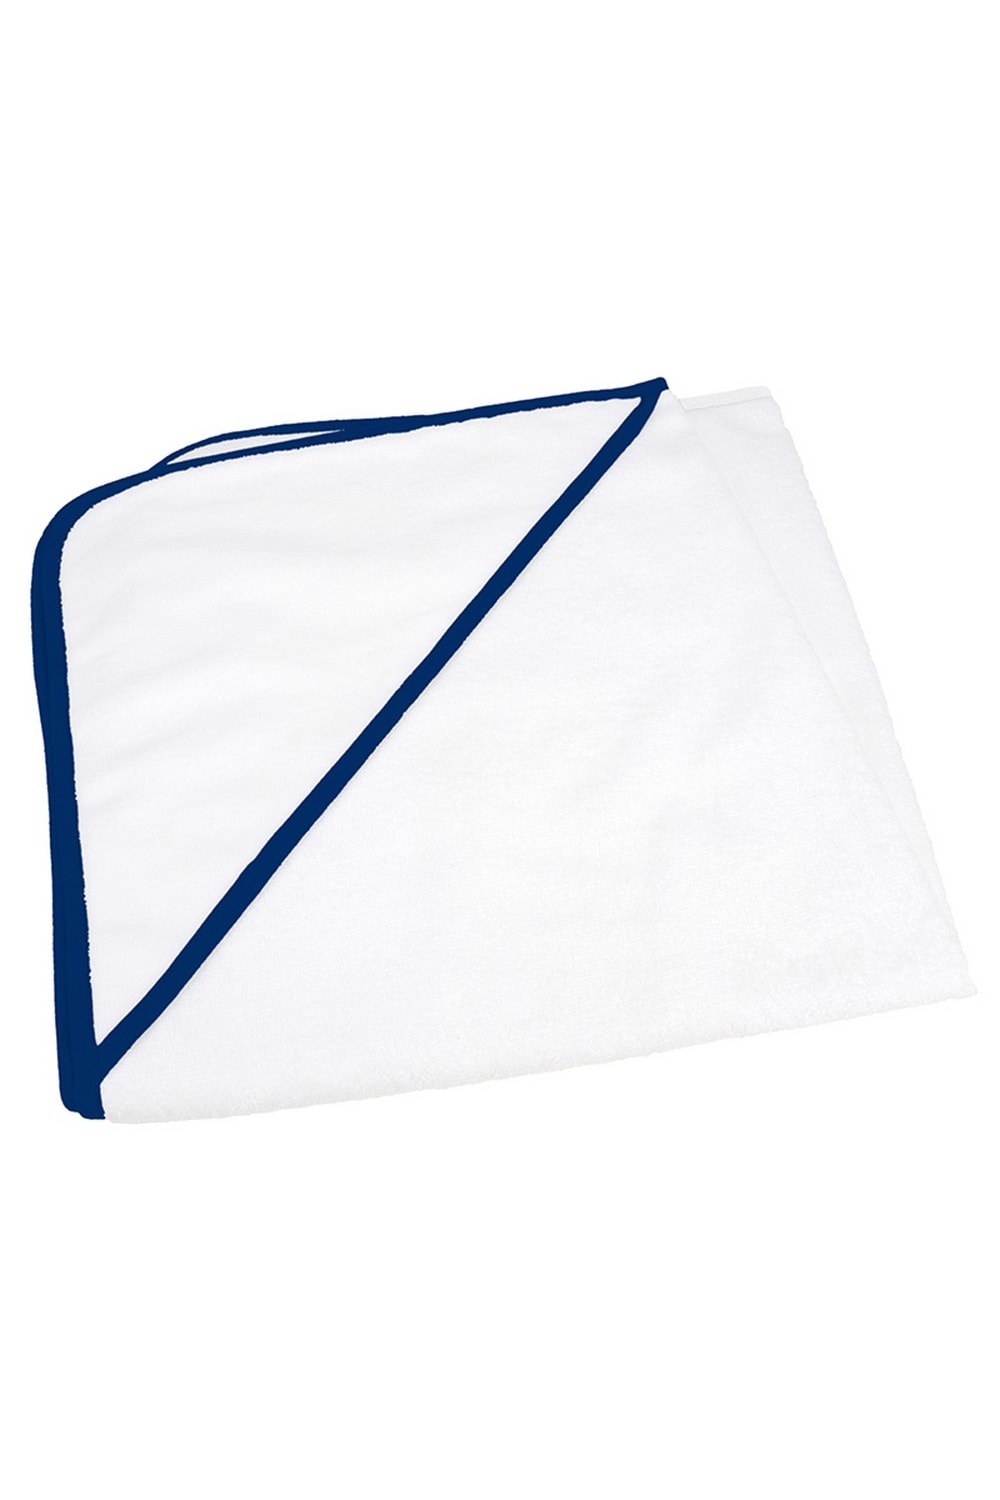 A&R Towels Baby/Toddler Babiezz All-over Sublimation Hooded Towel (White/ French Navy) (One Size)